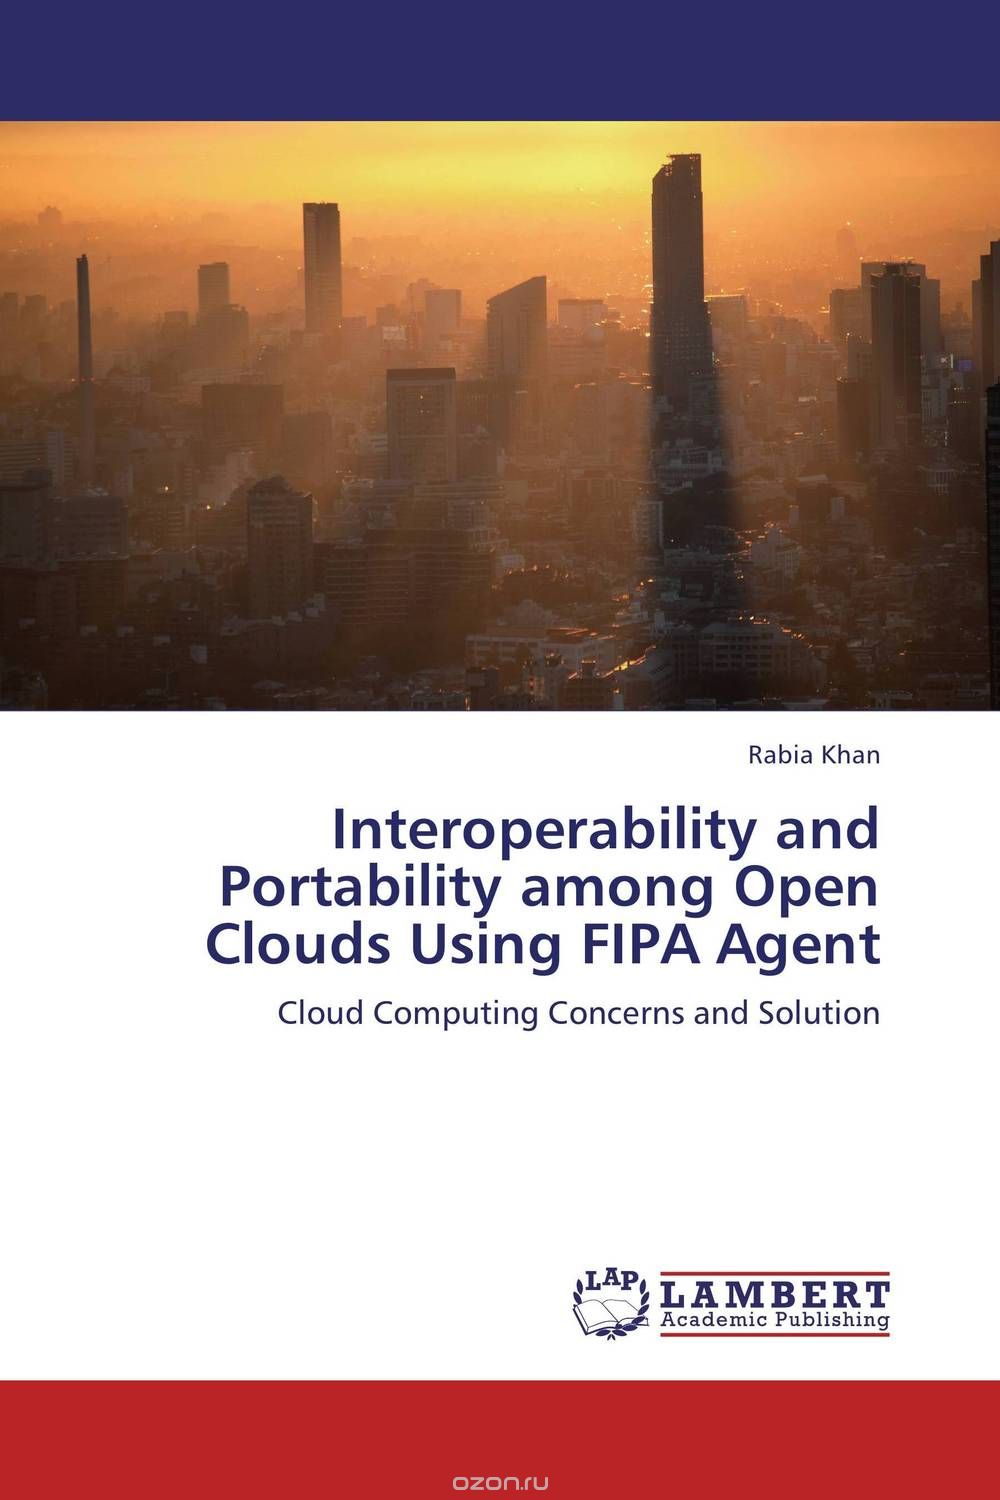 Interoperability and Portability among Open Clouds Using FIPA Agent